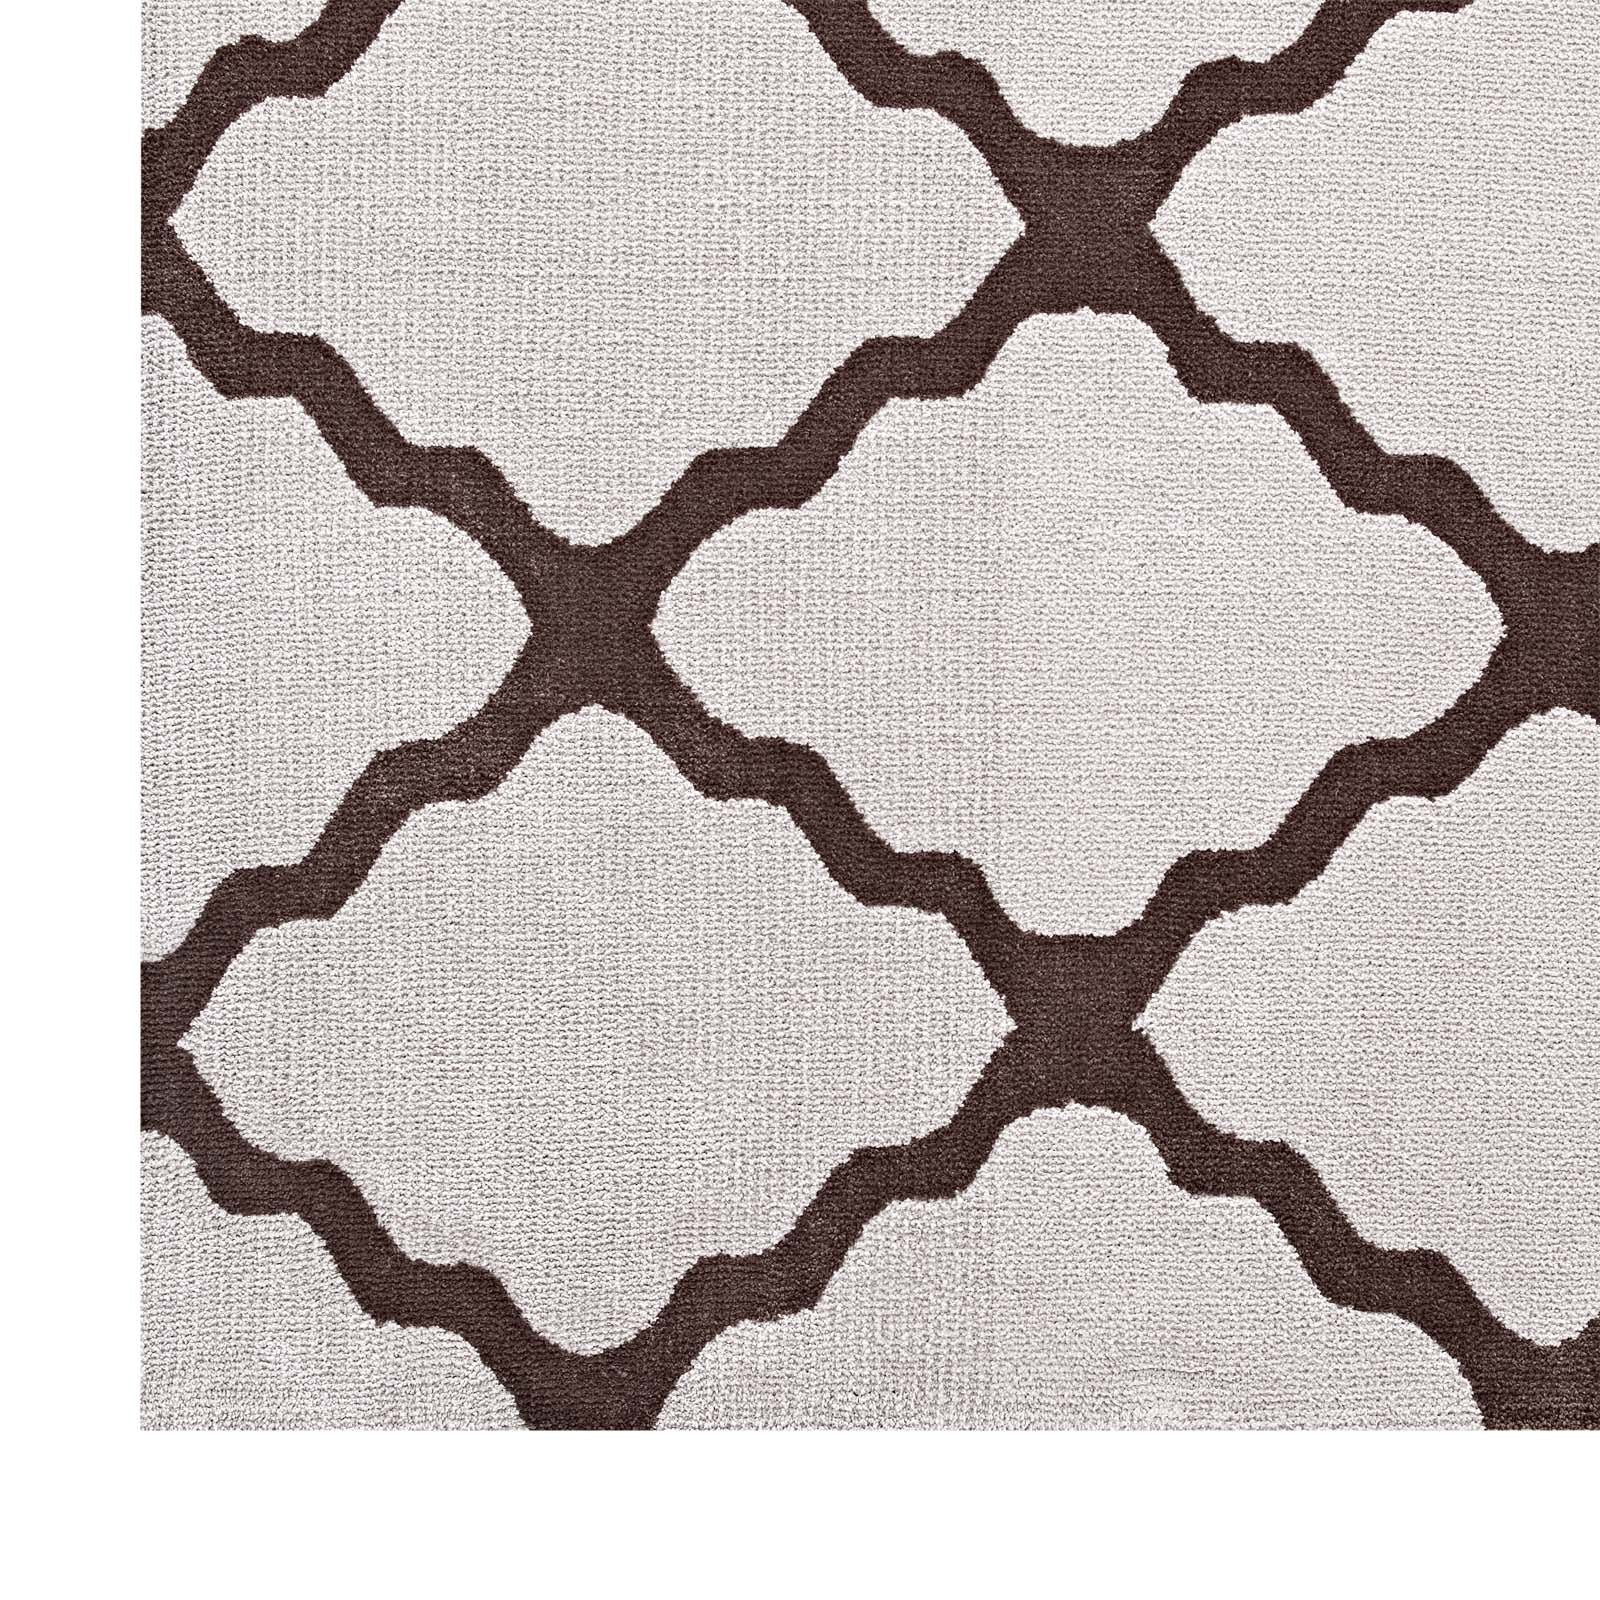 Marja Moroccan Trellis 8x10 Area Rug R-1003-810 Brown and Gray